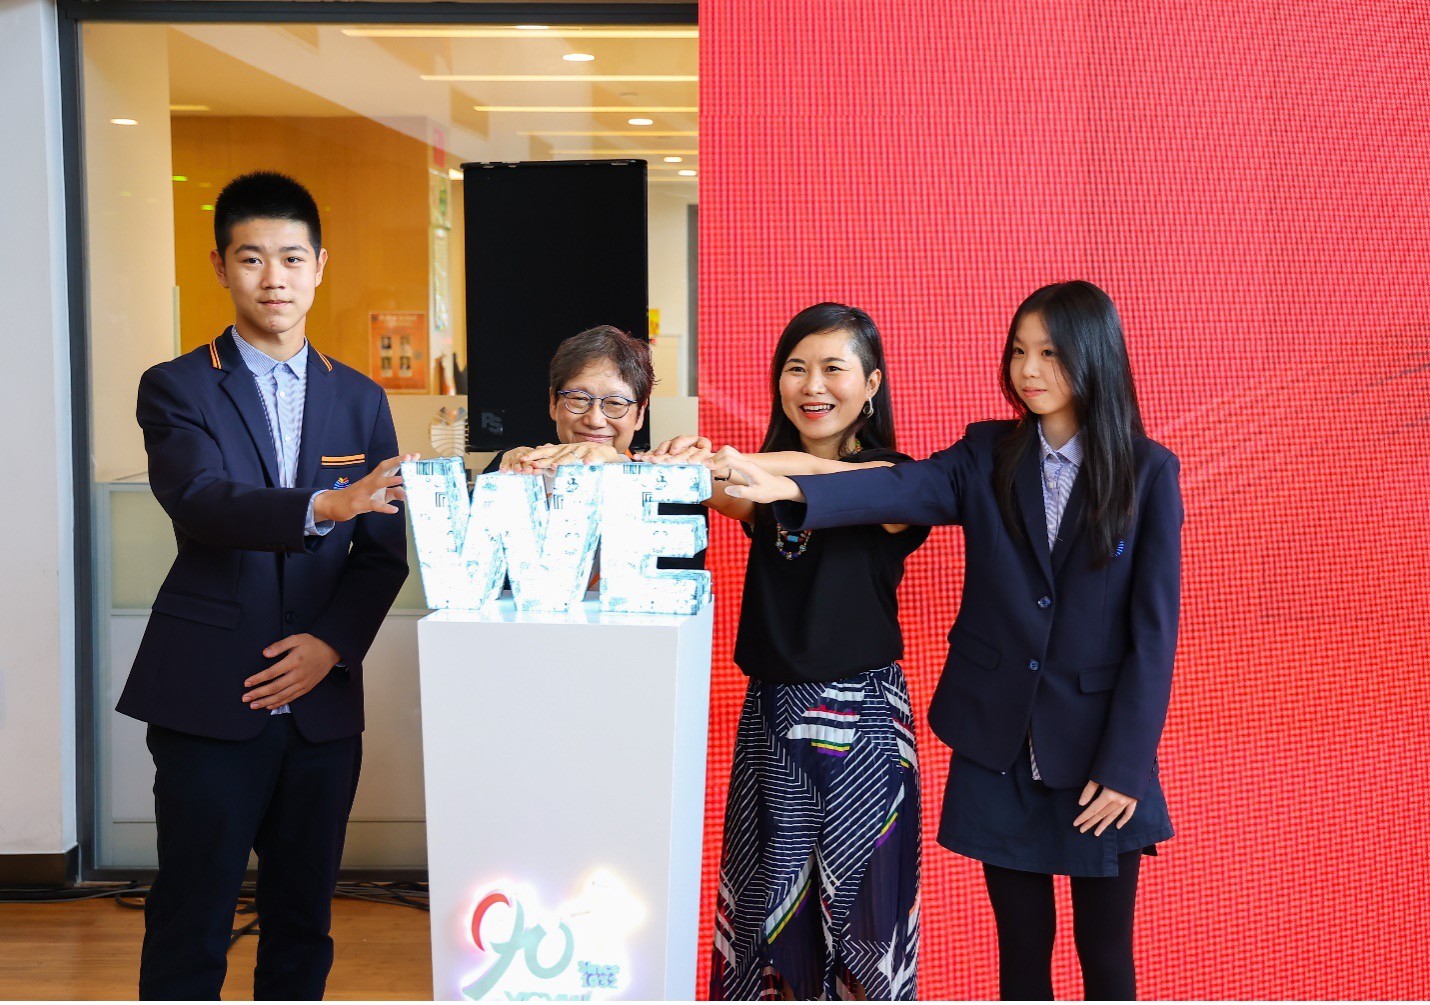 Dr Betty Chan Po-king, CEO and School Supervisor of Yew Chung Yew Wah Education Network, unveiled the Mural together with artist-in-residence Ms Haruka Ostley and two YWIES Shanghai Lingang students. 